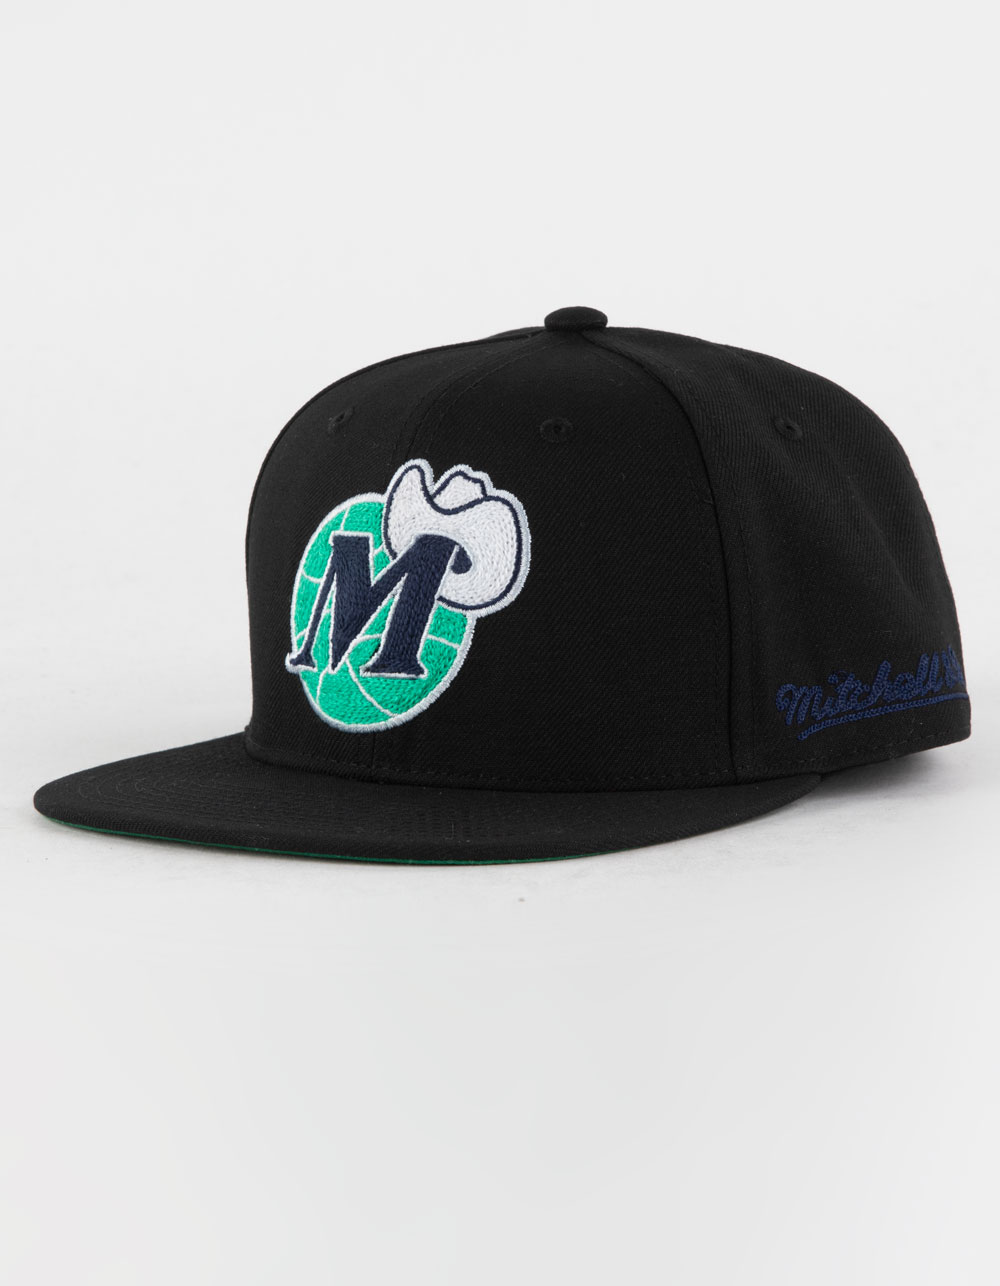 MITCHELL & NESS: BAGS AND ACCESSORIES, MITCHELL AND NESS DALLAS MAVERICKS  BASE